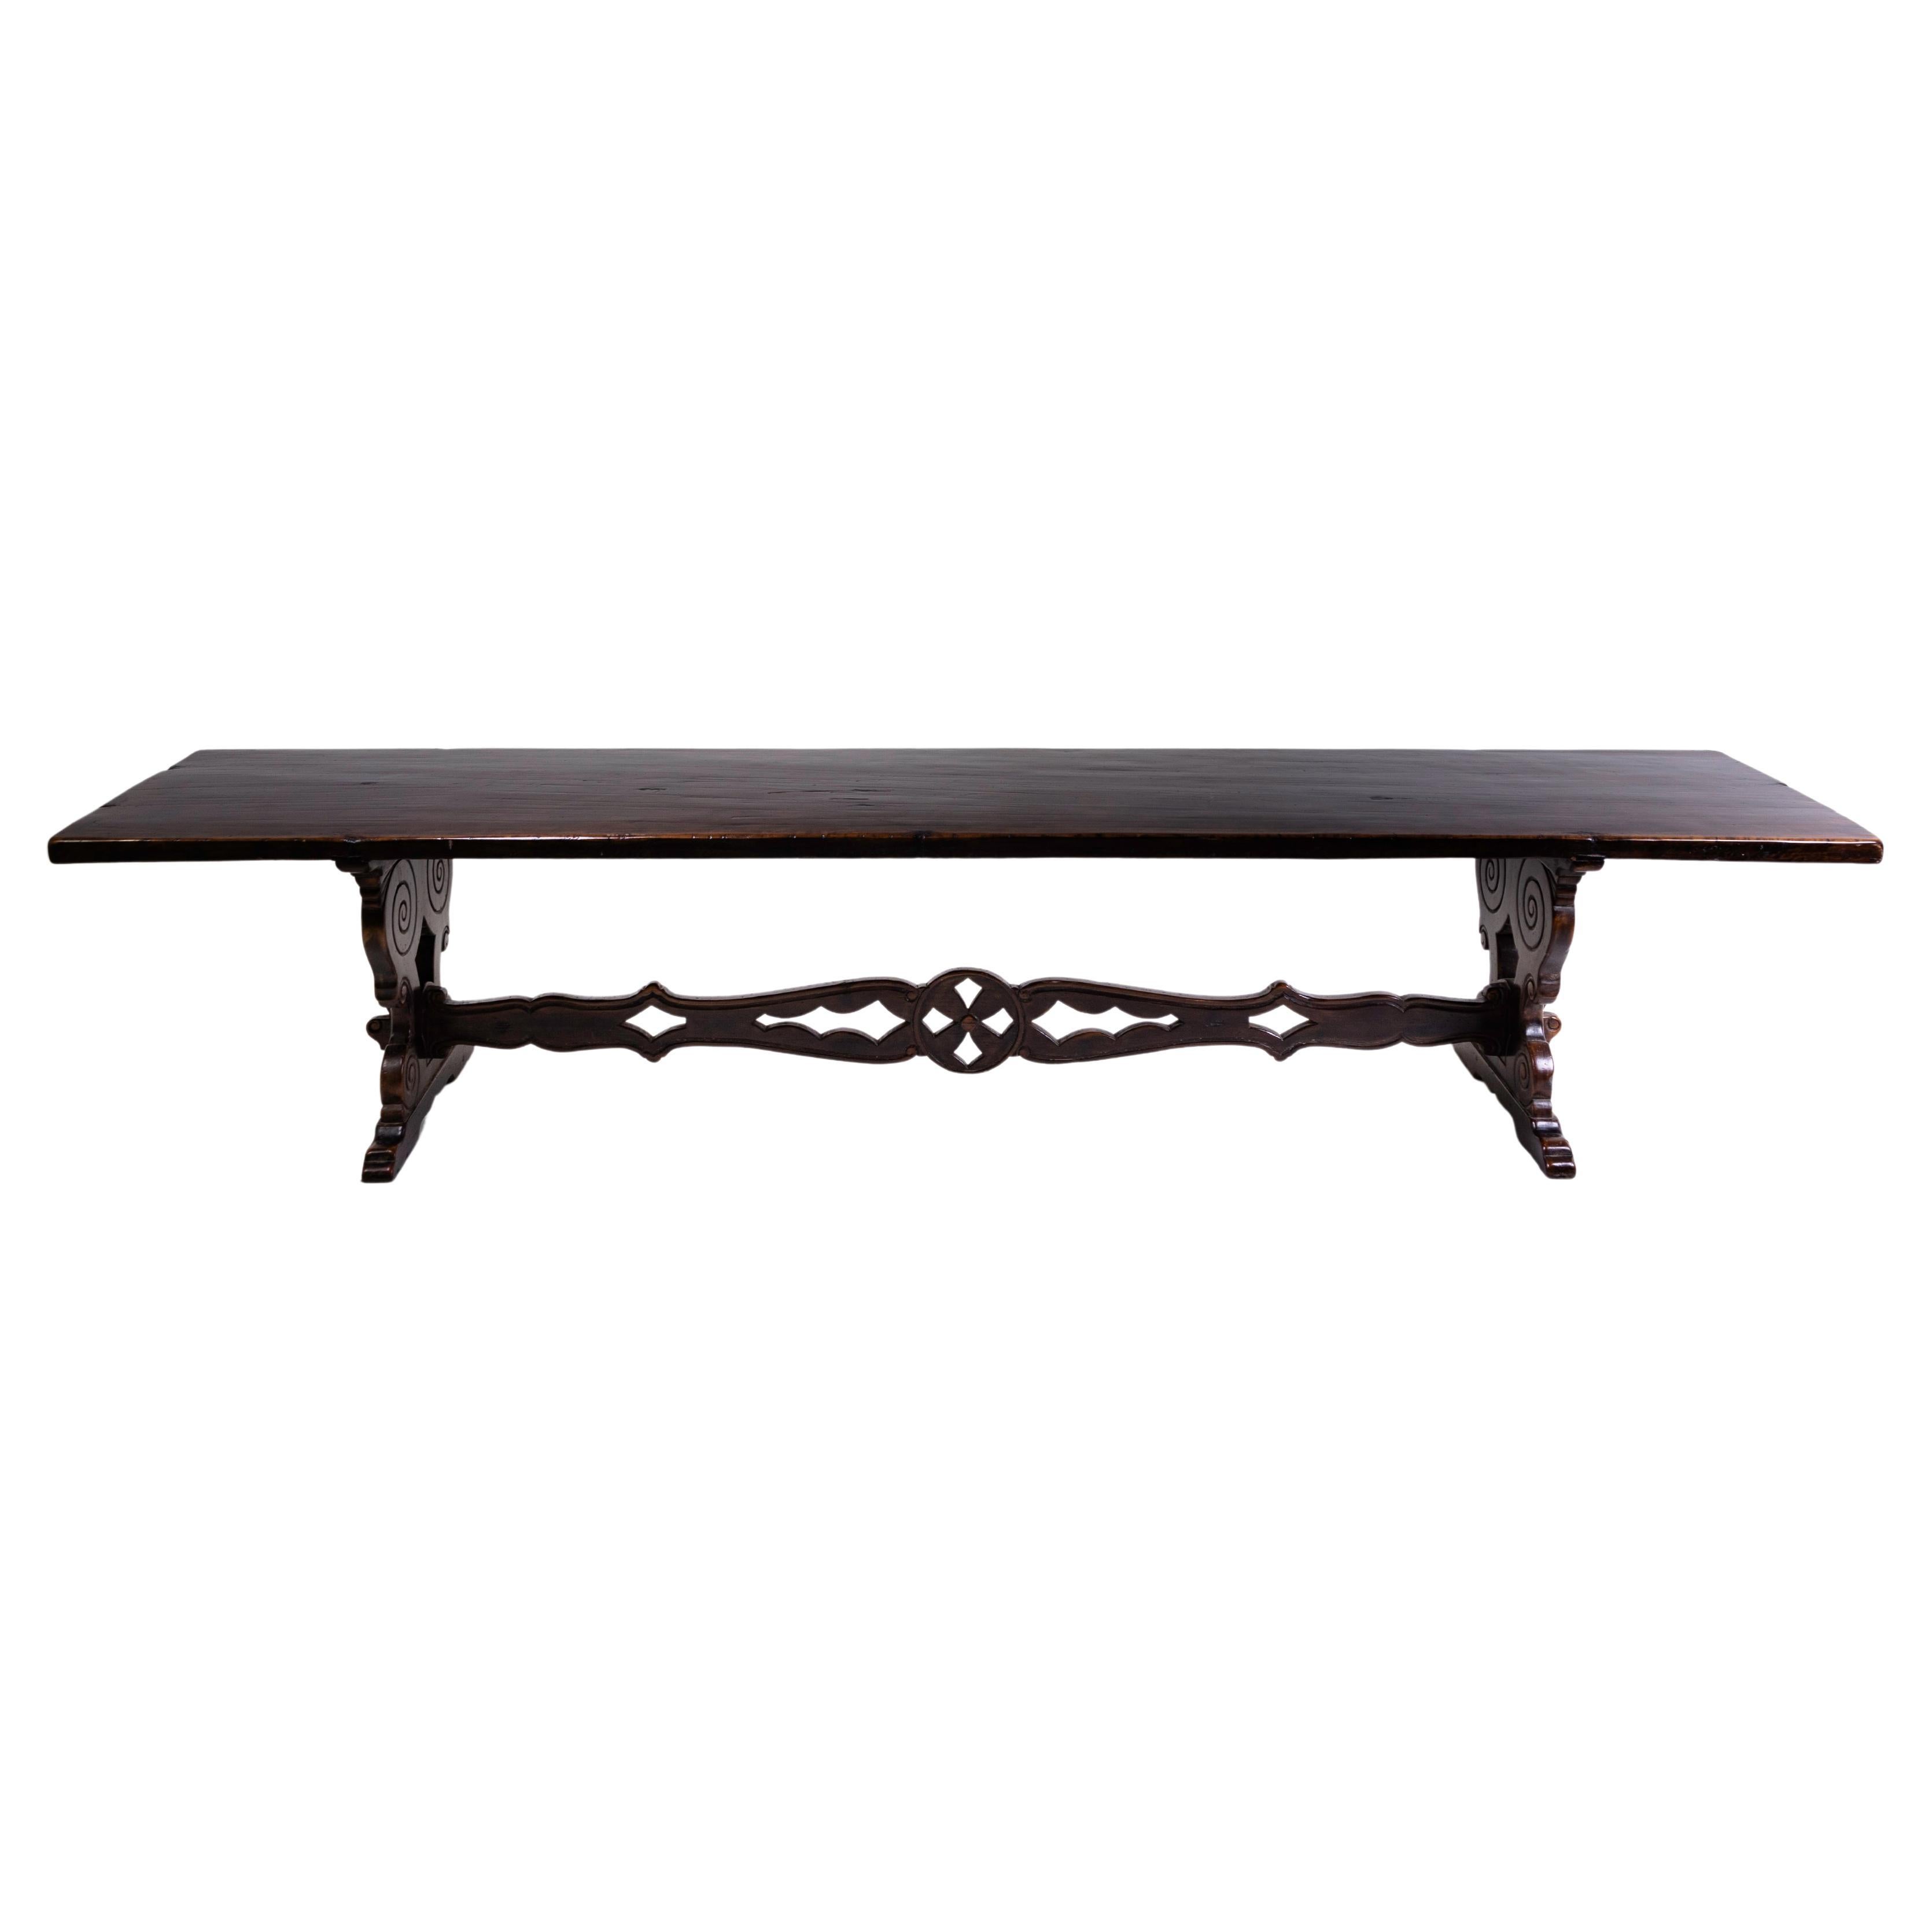 Refectory Table, Italy 18th / 19th Century